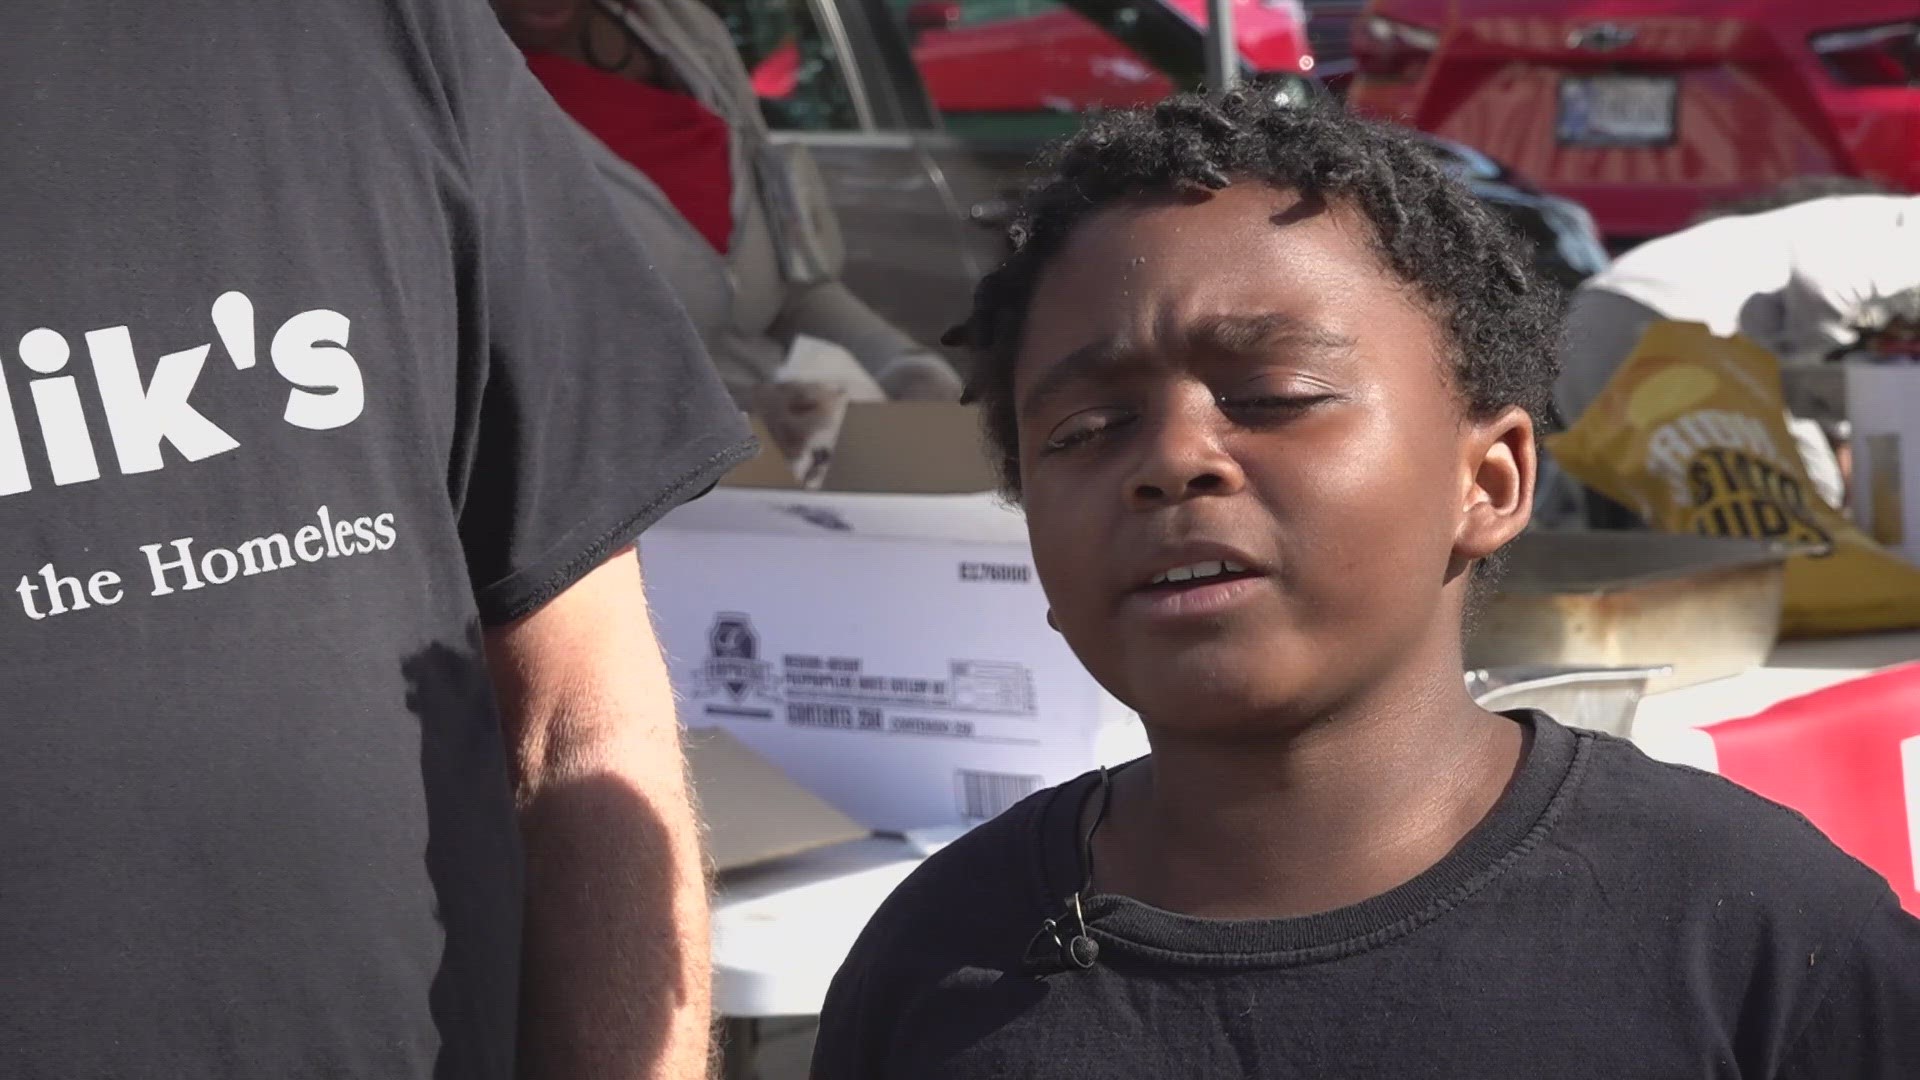 8-year-old Malik talked with 13News' Anna Chalker about his desire to help the homeless.